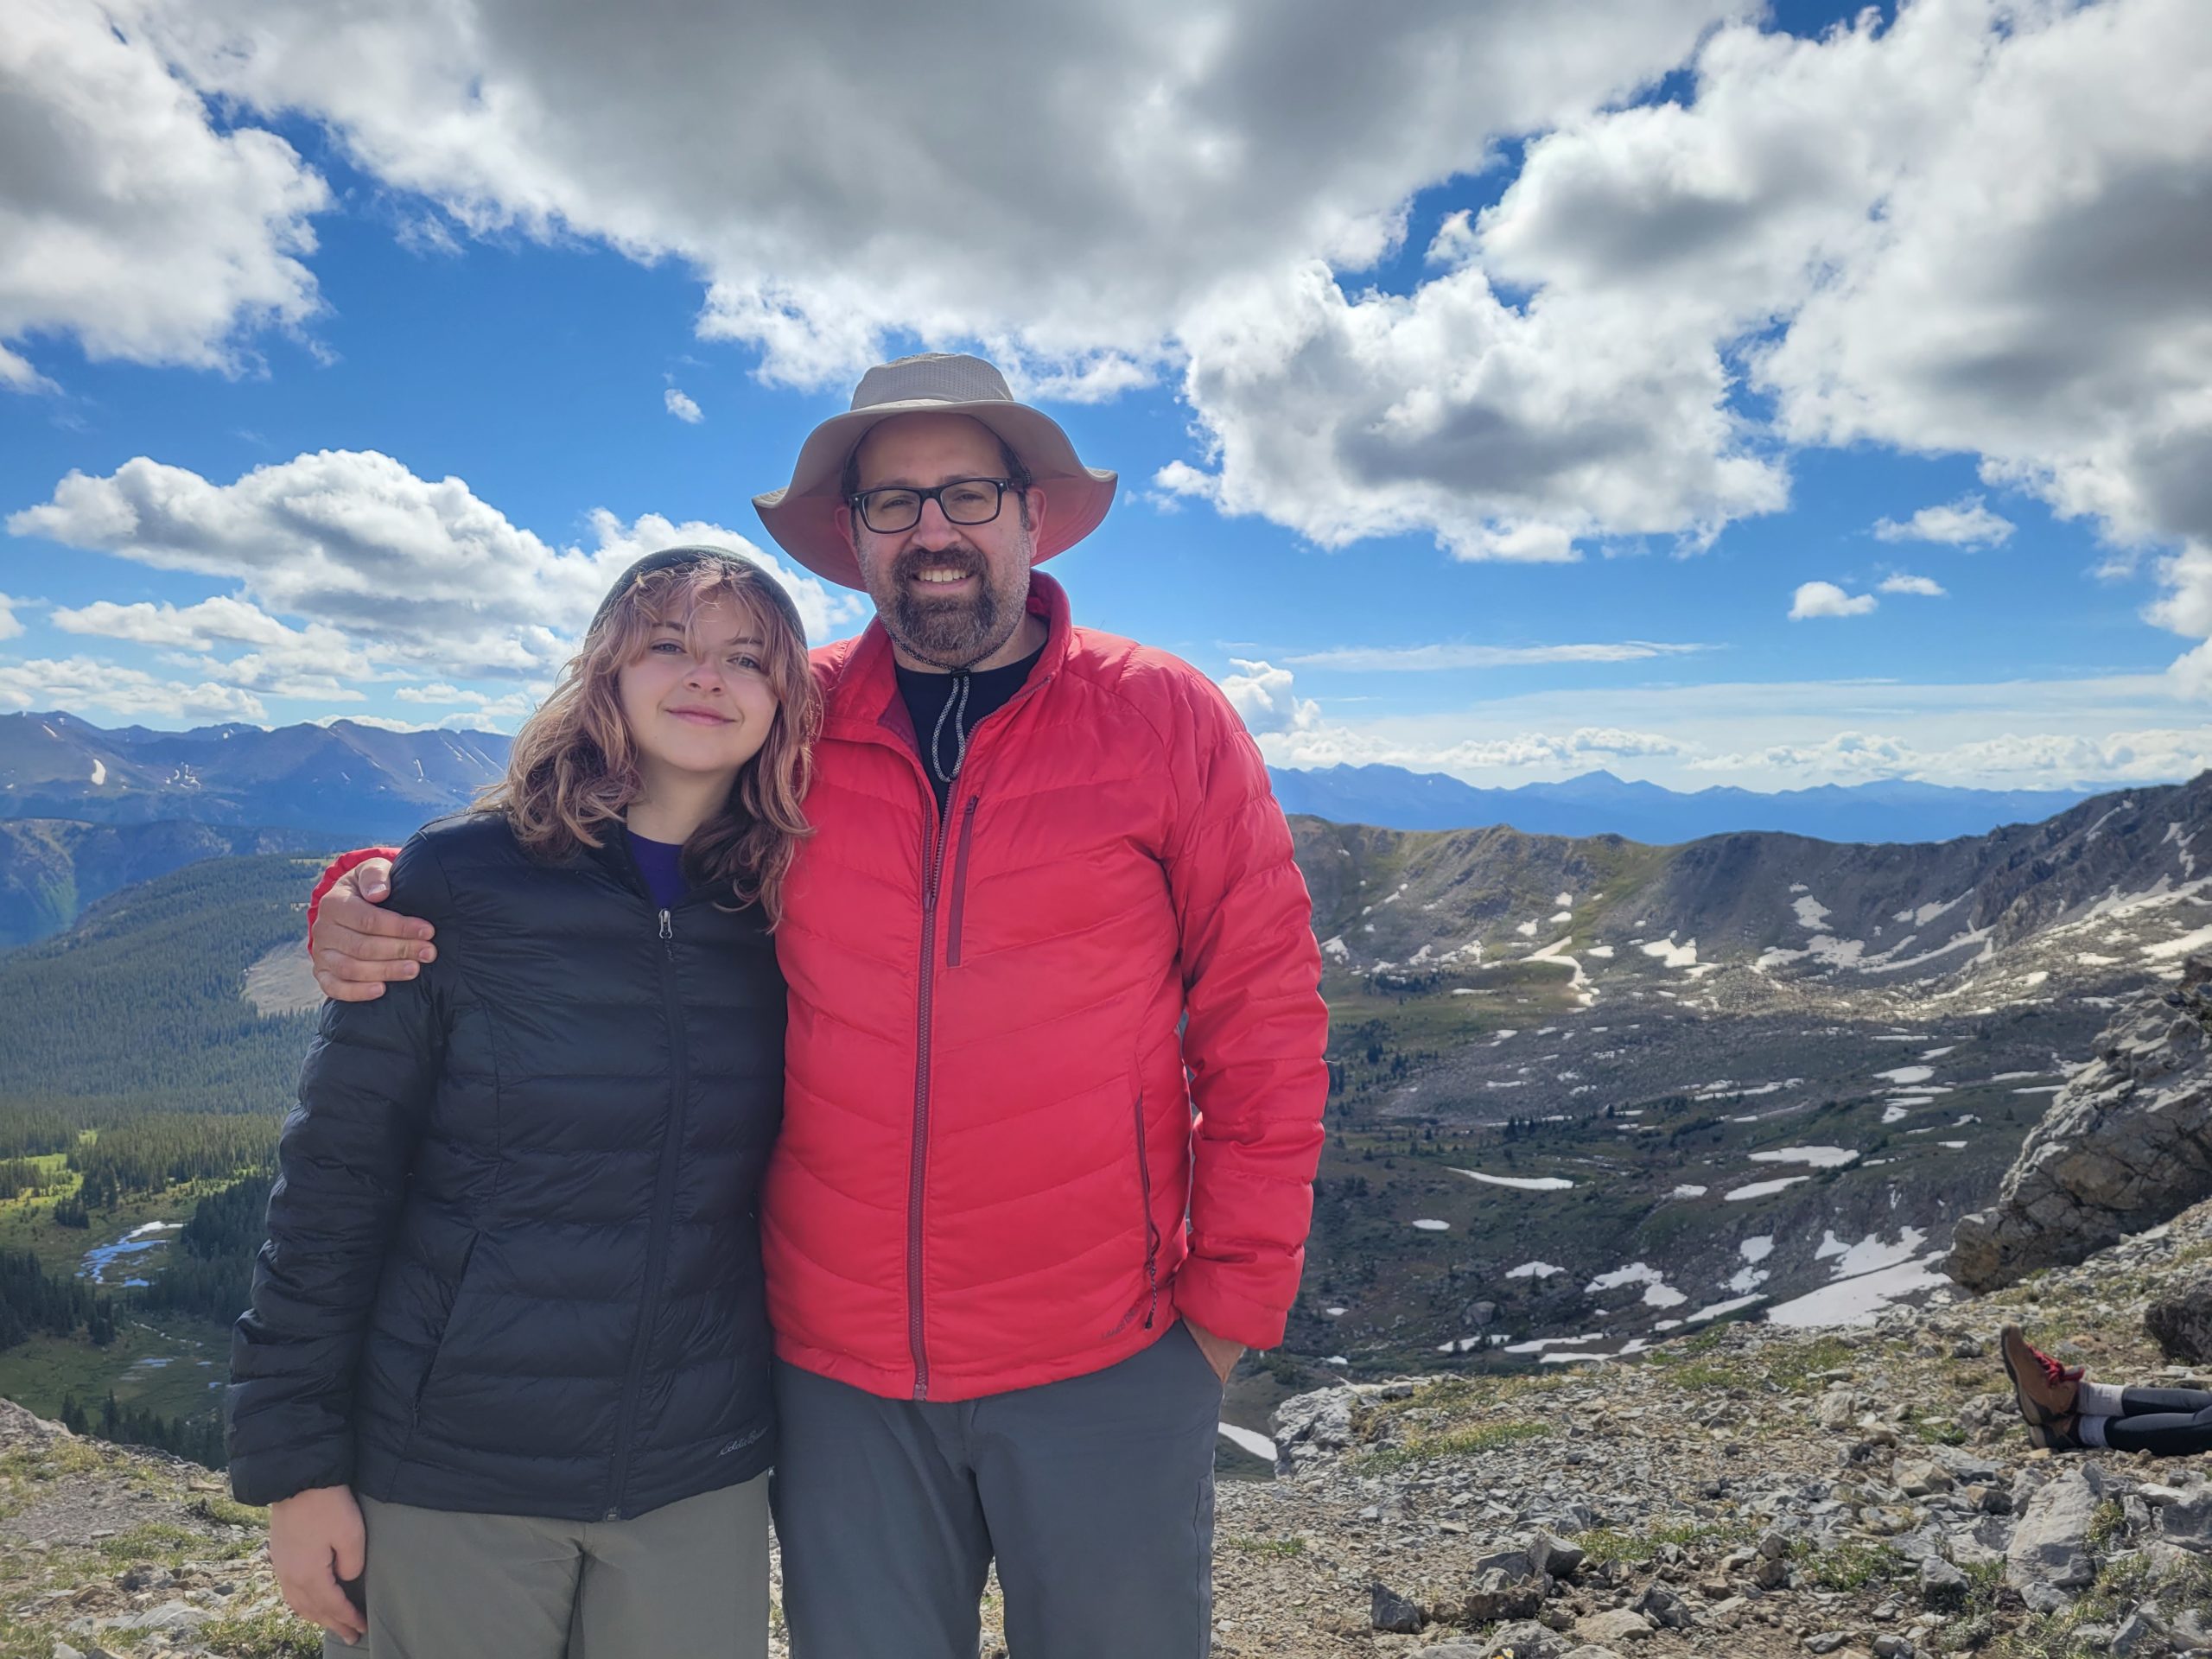 “The Summit of Connection: A Father-Daughter Journey in Colorado” by: Maggie Volpi